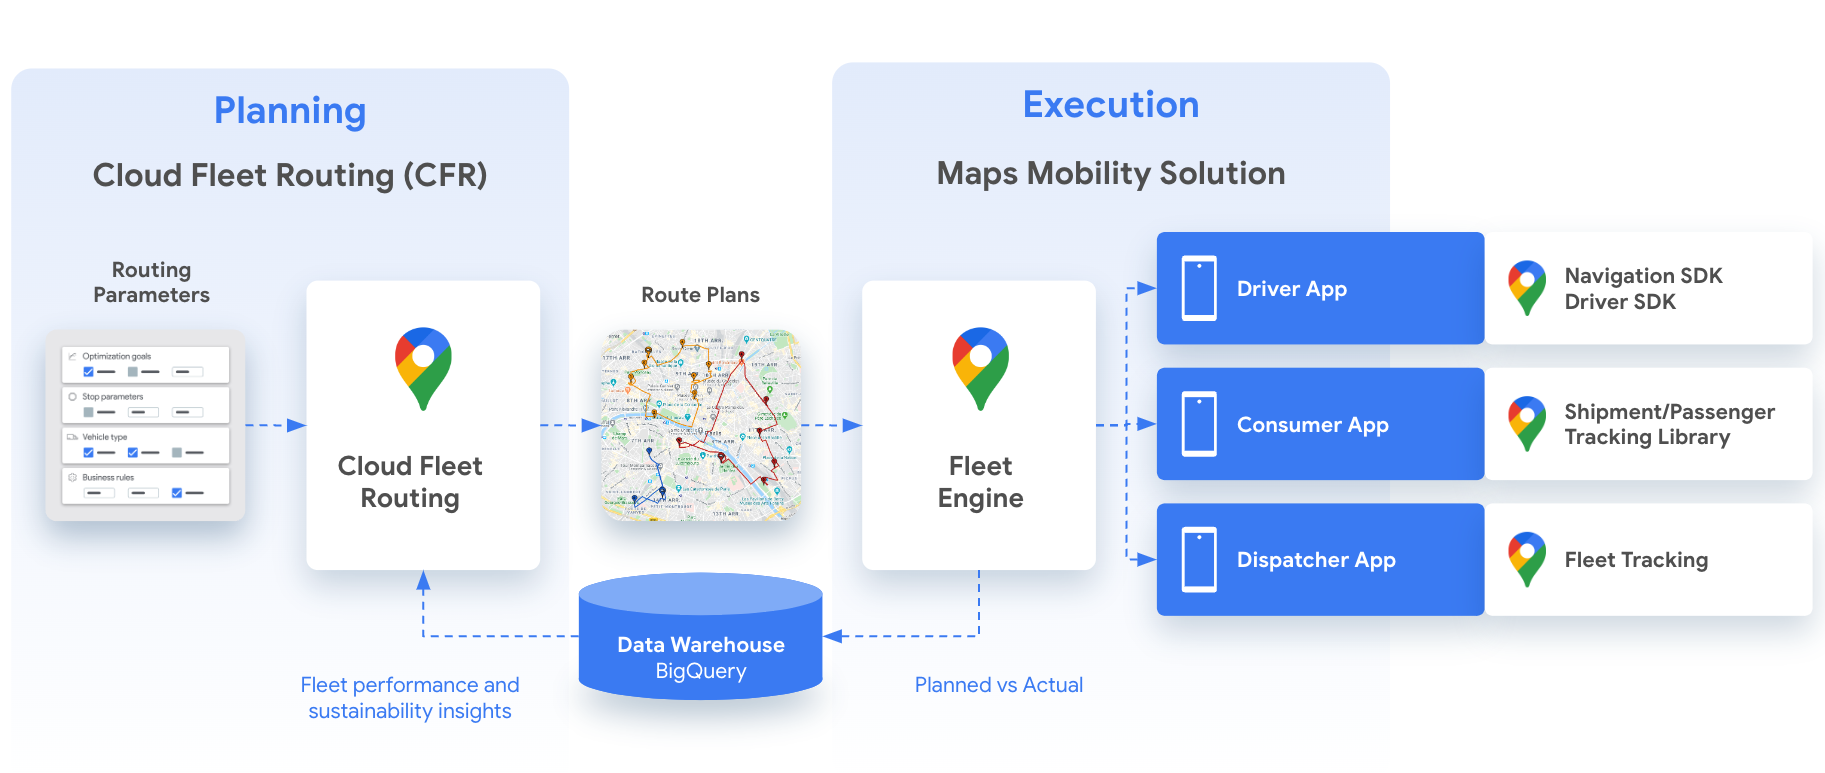 How Cloud Fleet Routing and Google Maps work together